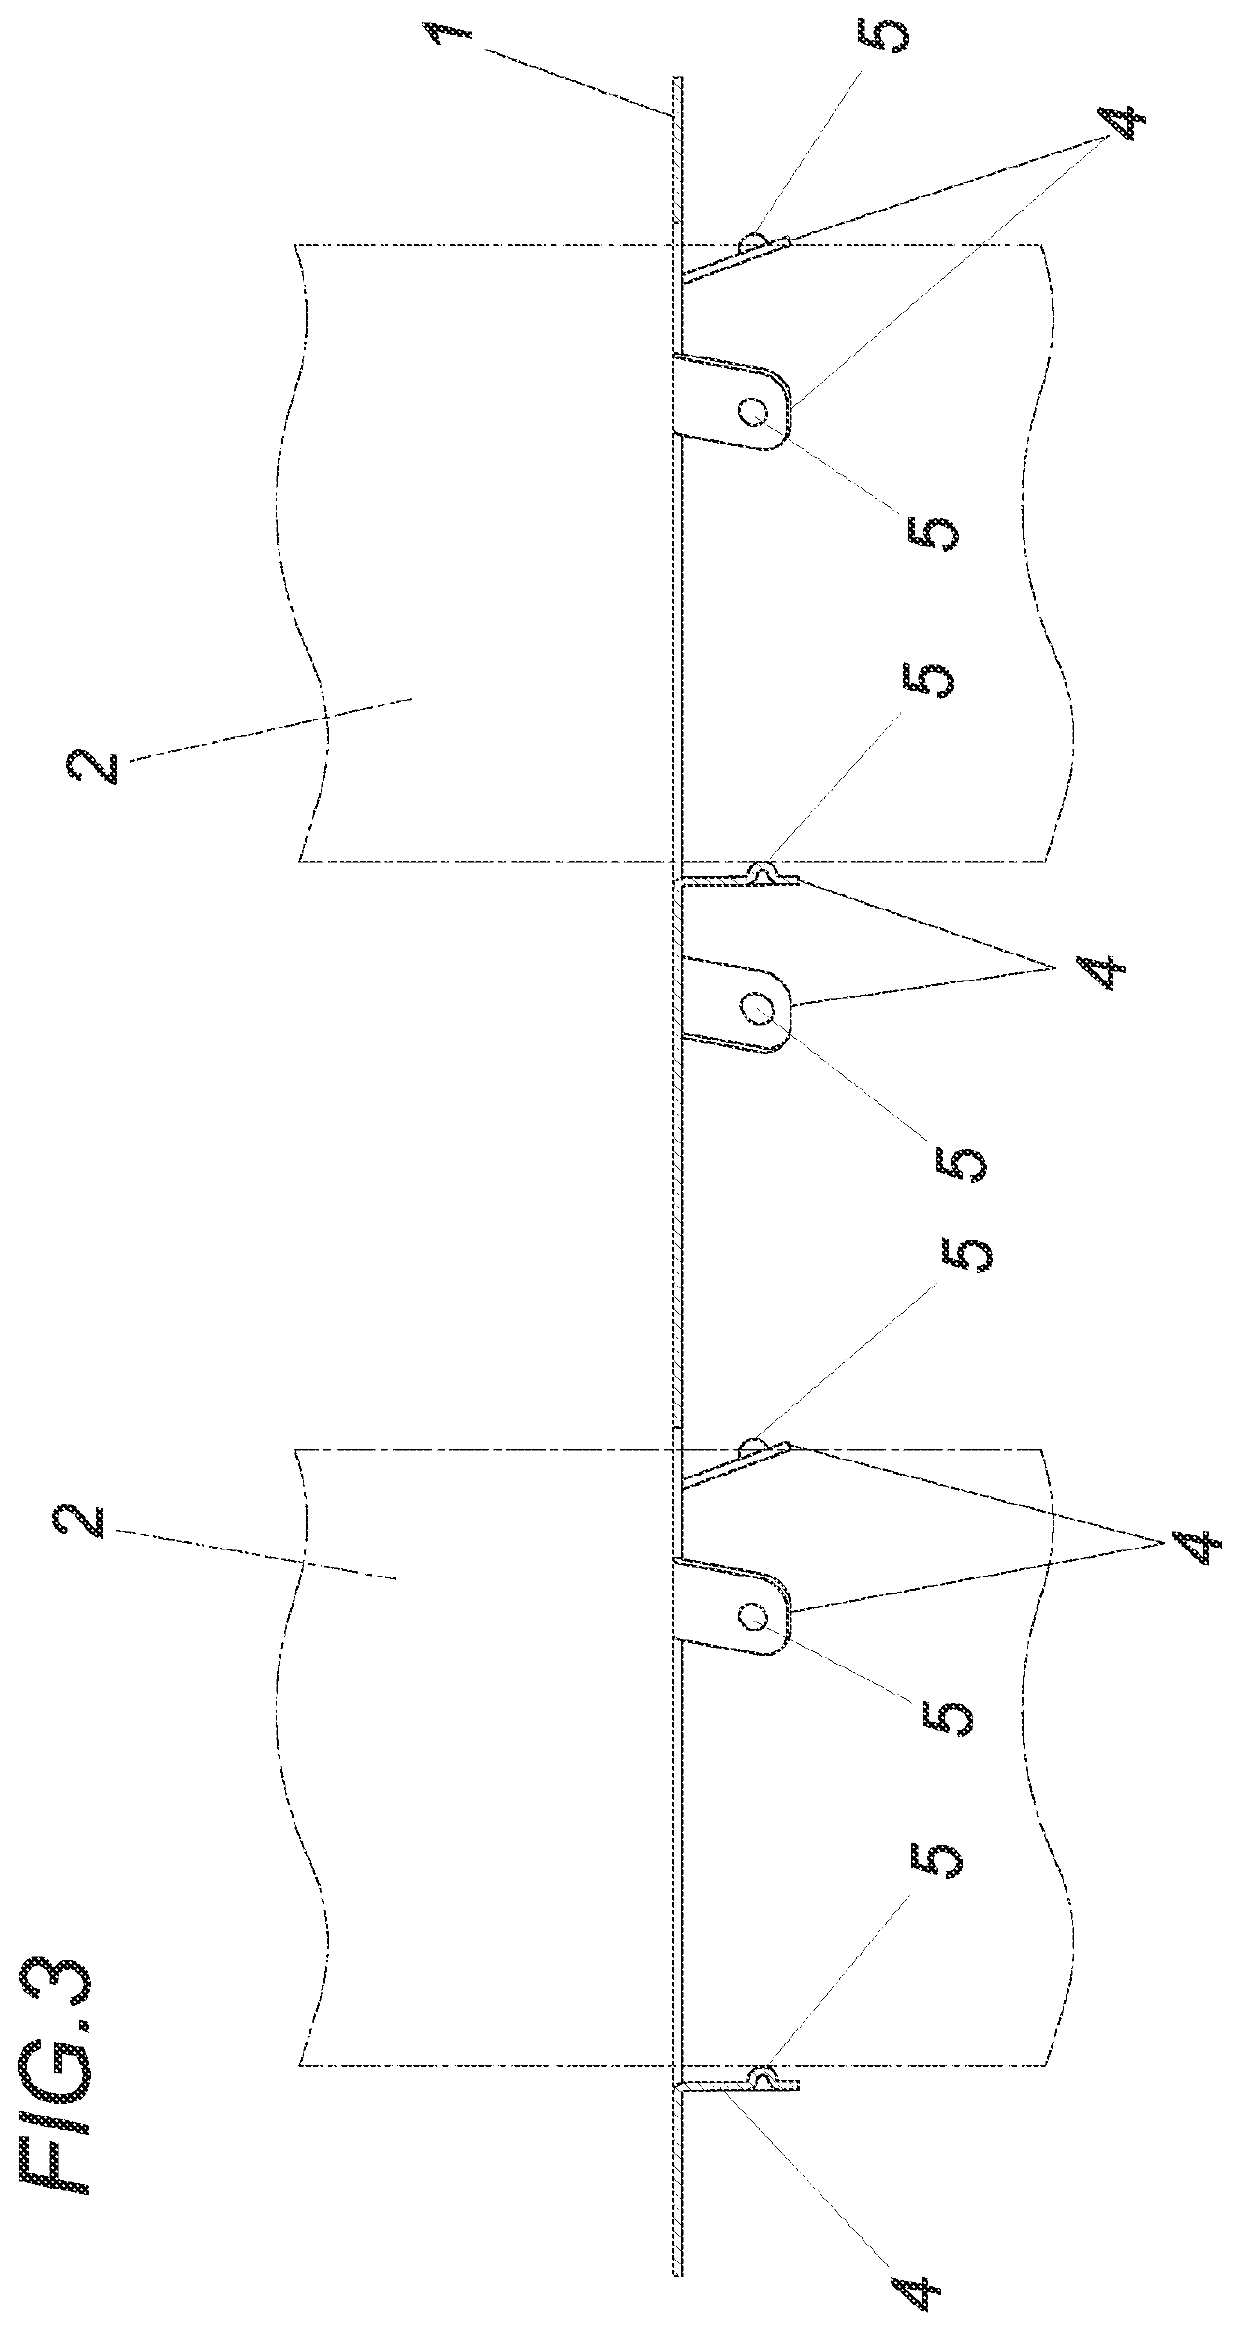 Apparatus for connecting in parallel a plurality of battery cells which are arranged parallel to one another with respect to a joining axis